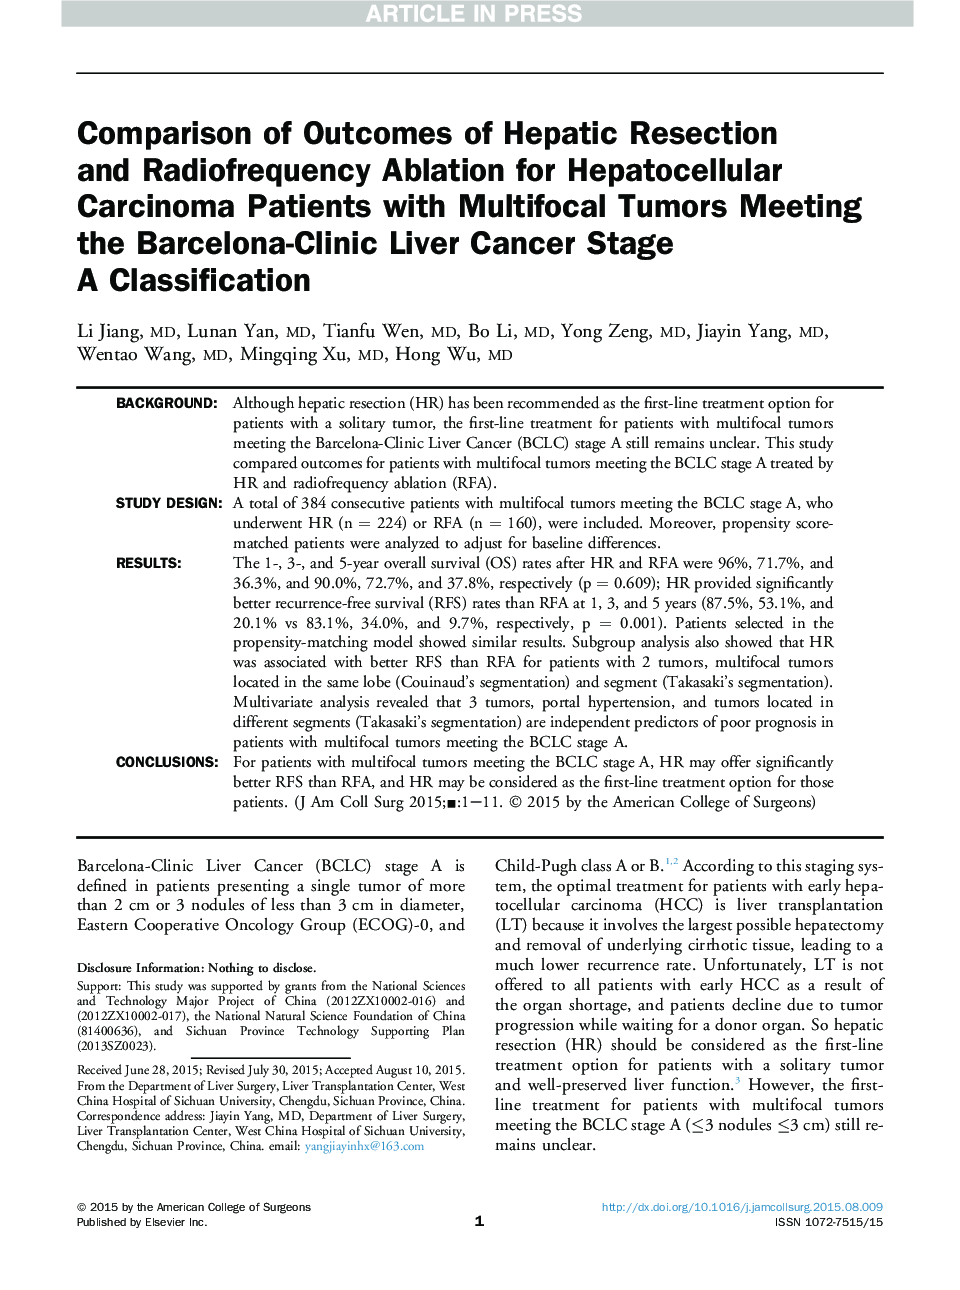 Comparison of Outcomes of Hepatic Resection and Radiofrequency Ablation for Hepatocellular Carcinoma Patients with Multifocal Tumors Meeting the Barcelona-Clinic Liver Cancer Stage AÂ Classification